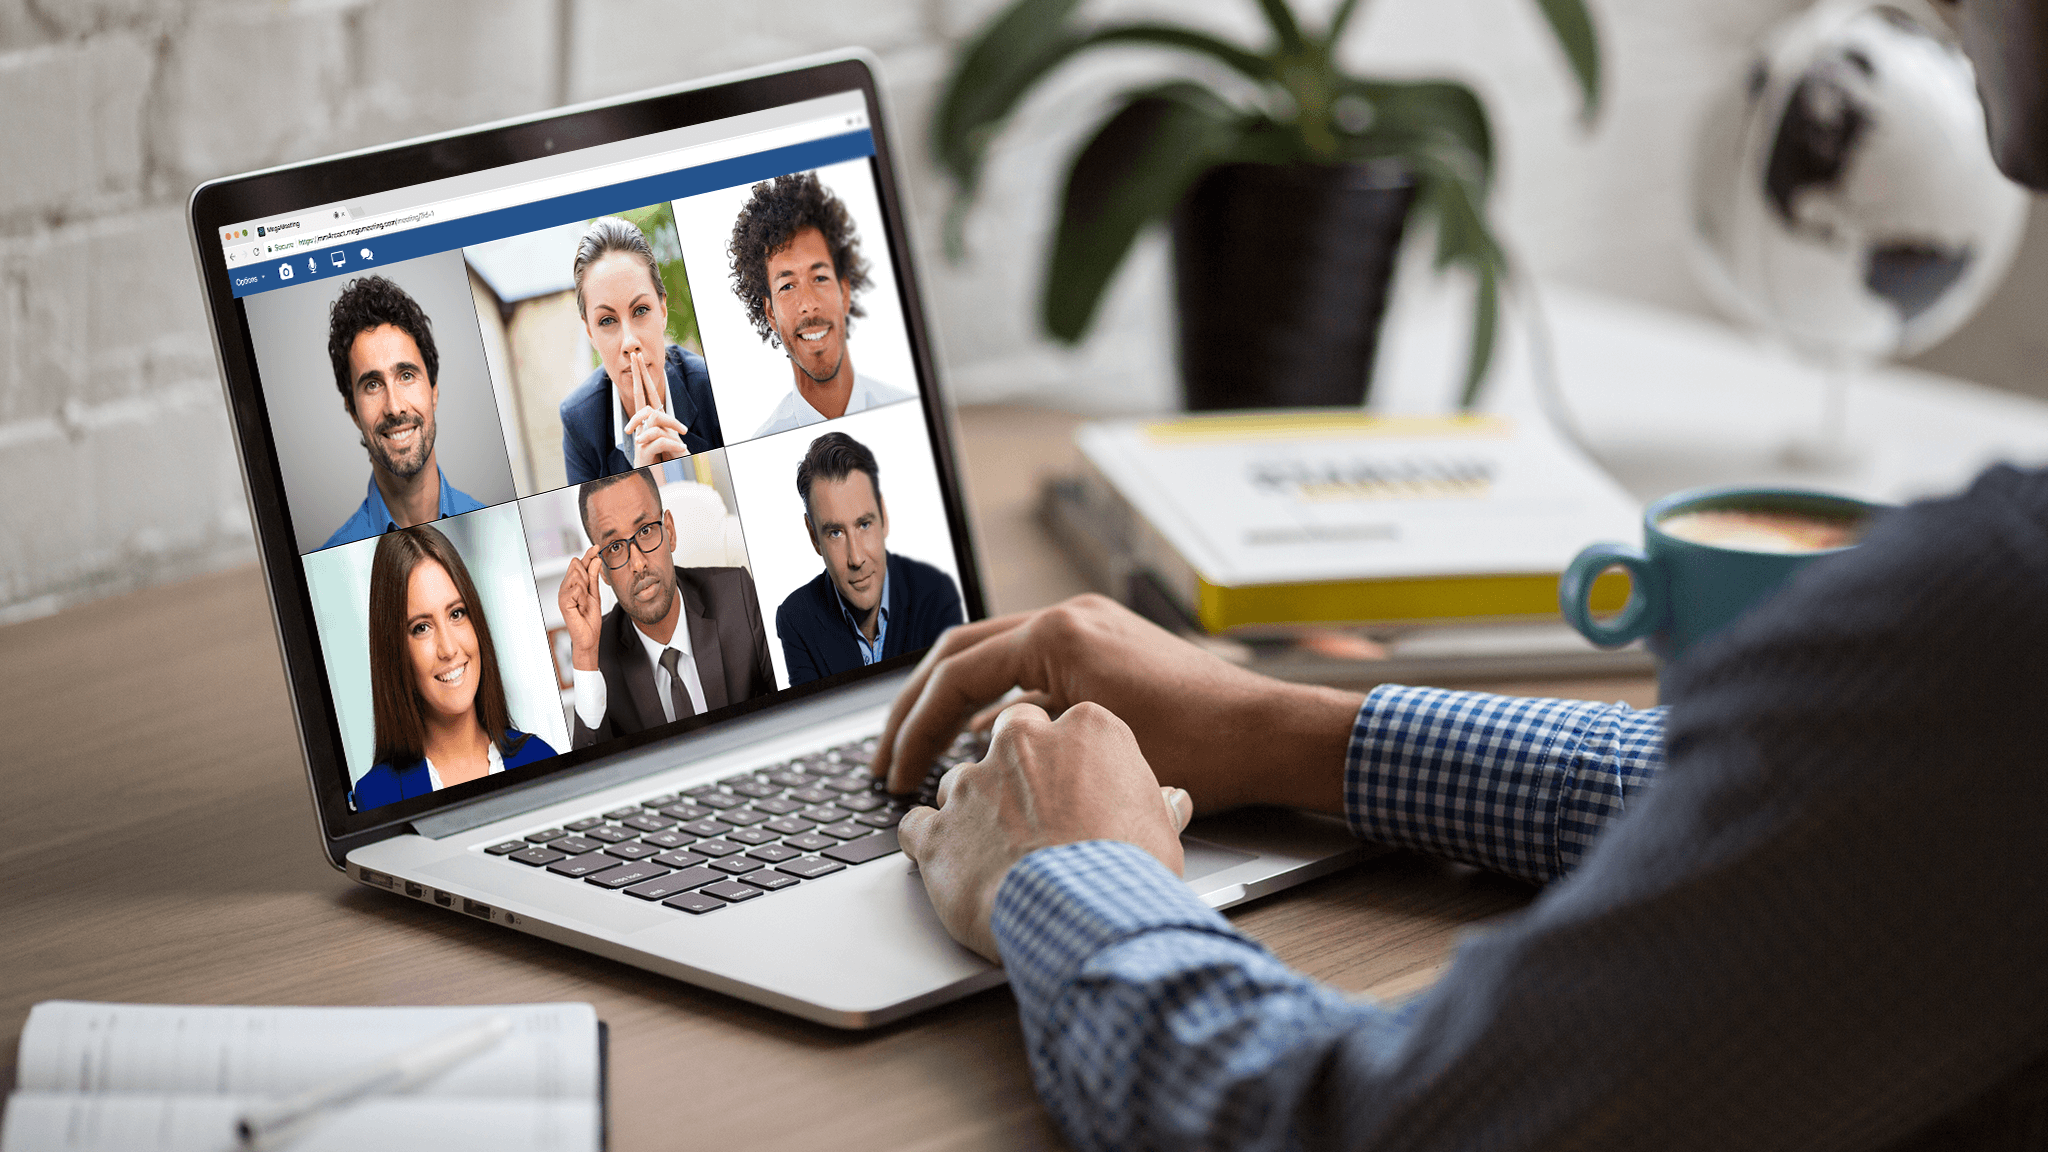 Five Ways Video and Web Conferencing Can Benefit Your Business